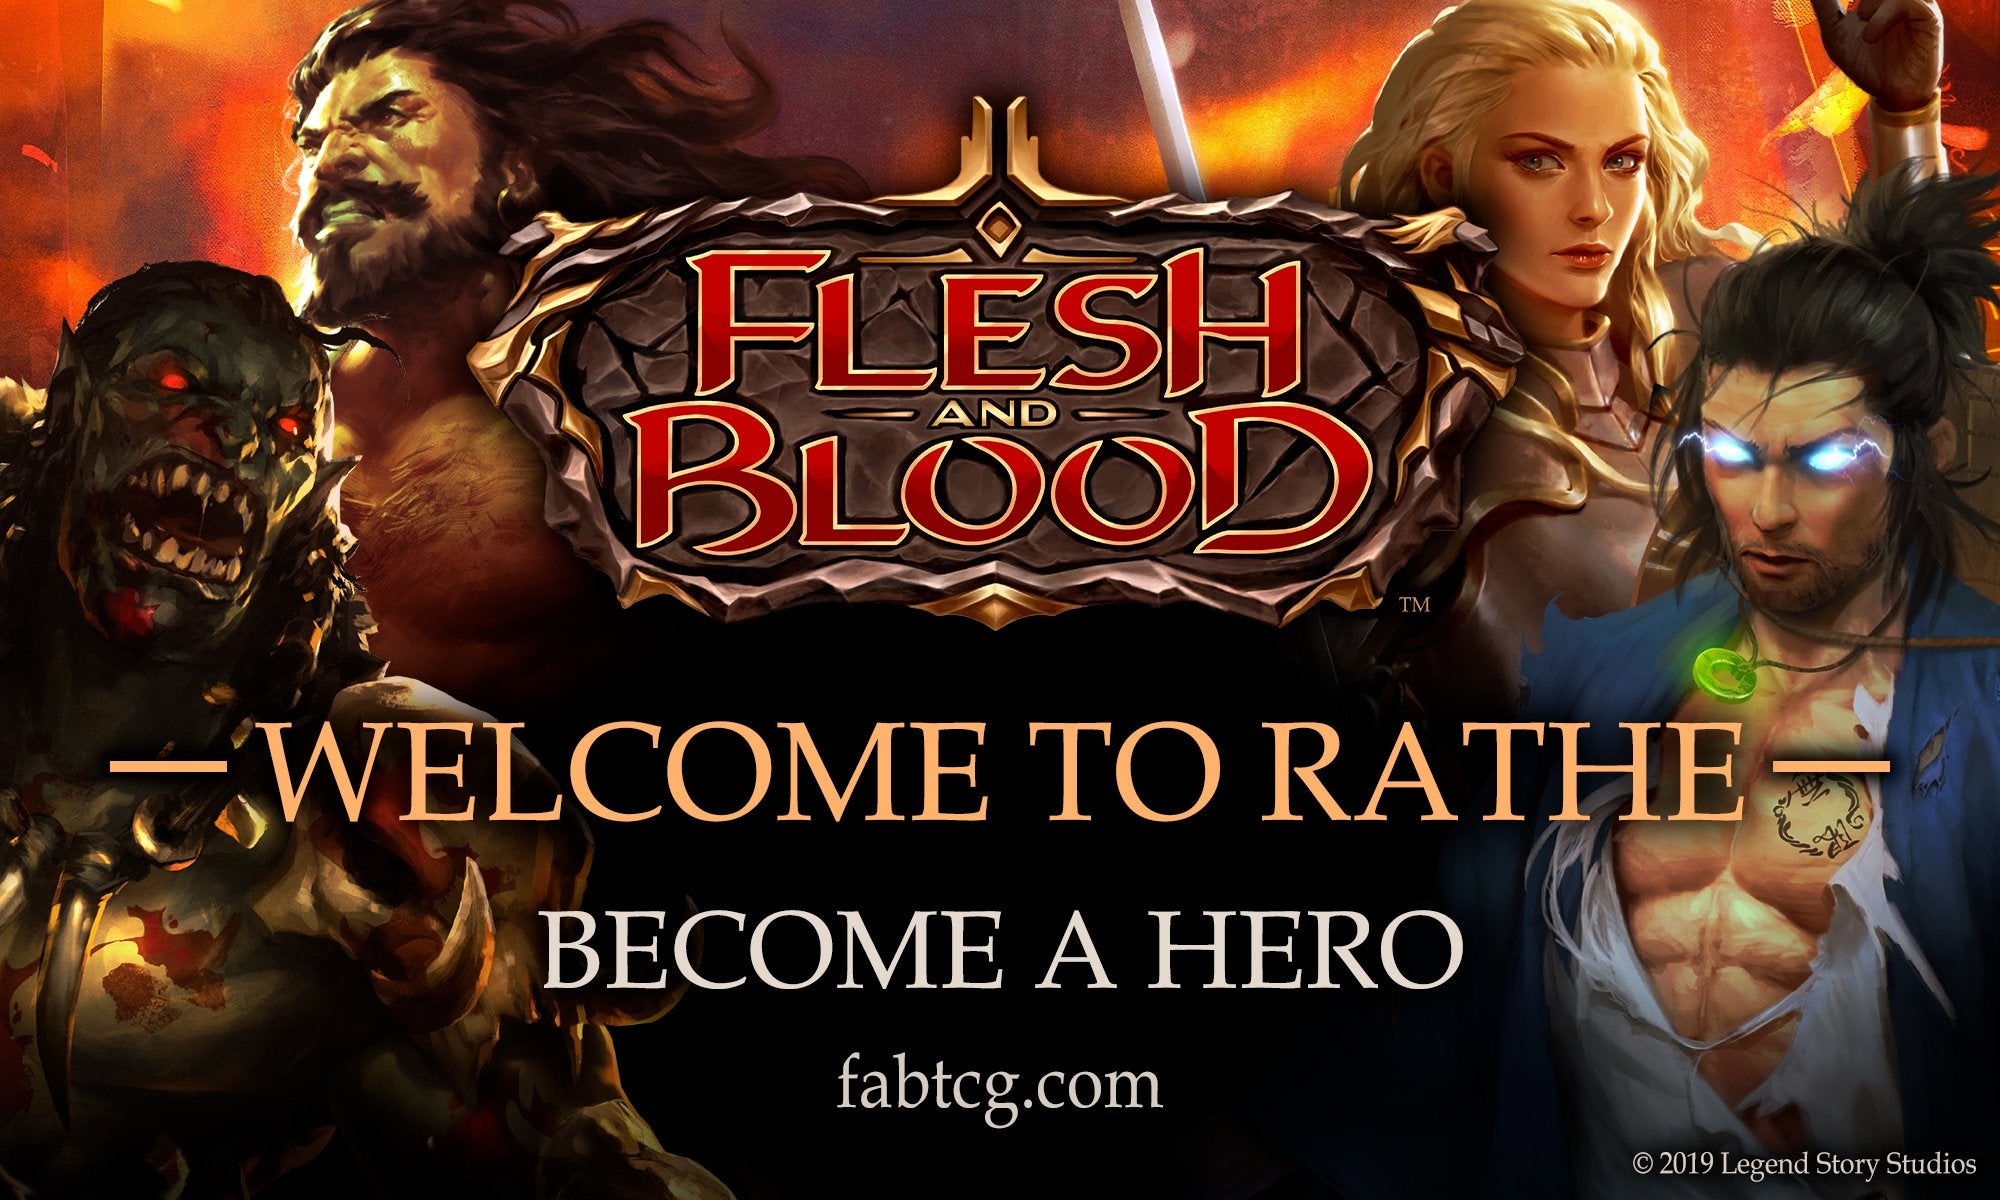 Flesh And Blood - Welcome To Rathe (UNLIMITED) - Booster Box (24 Packs)